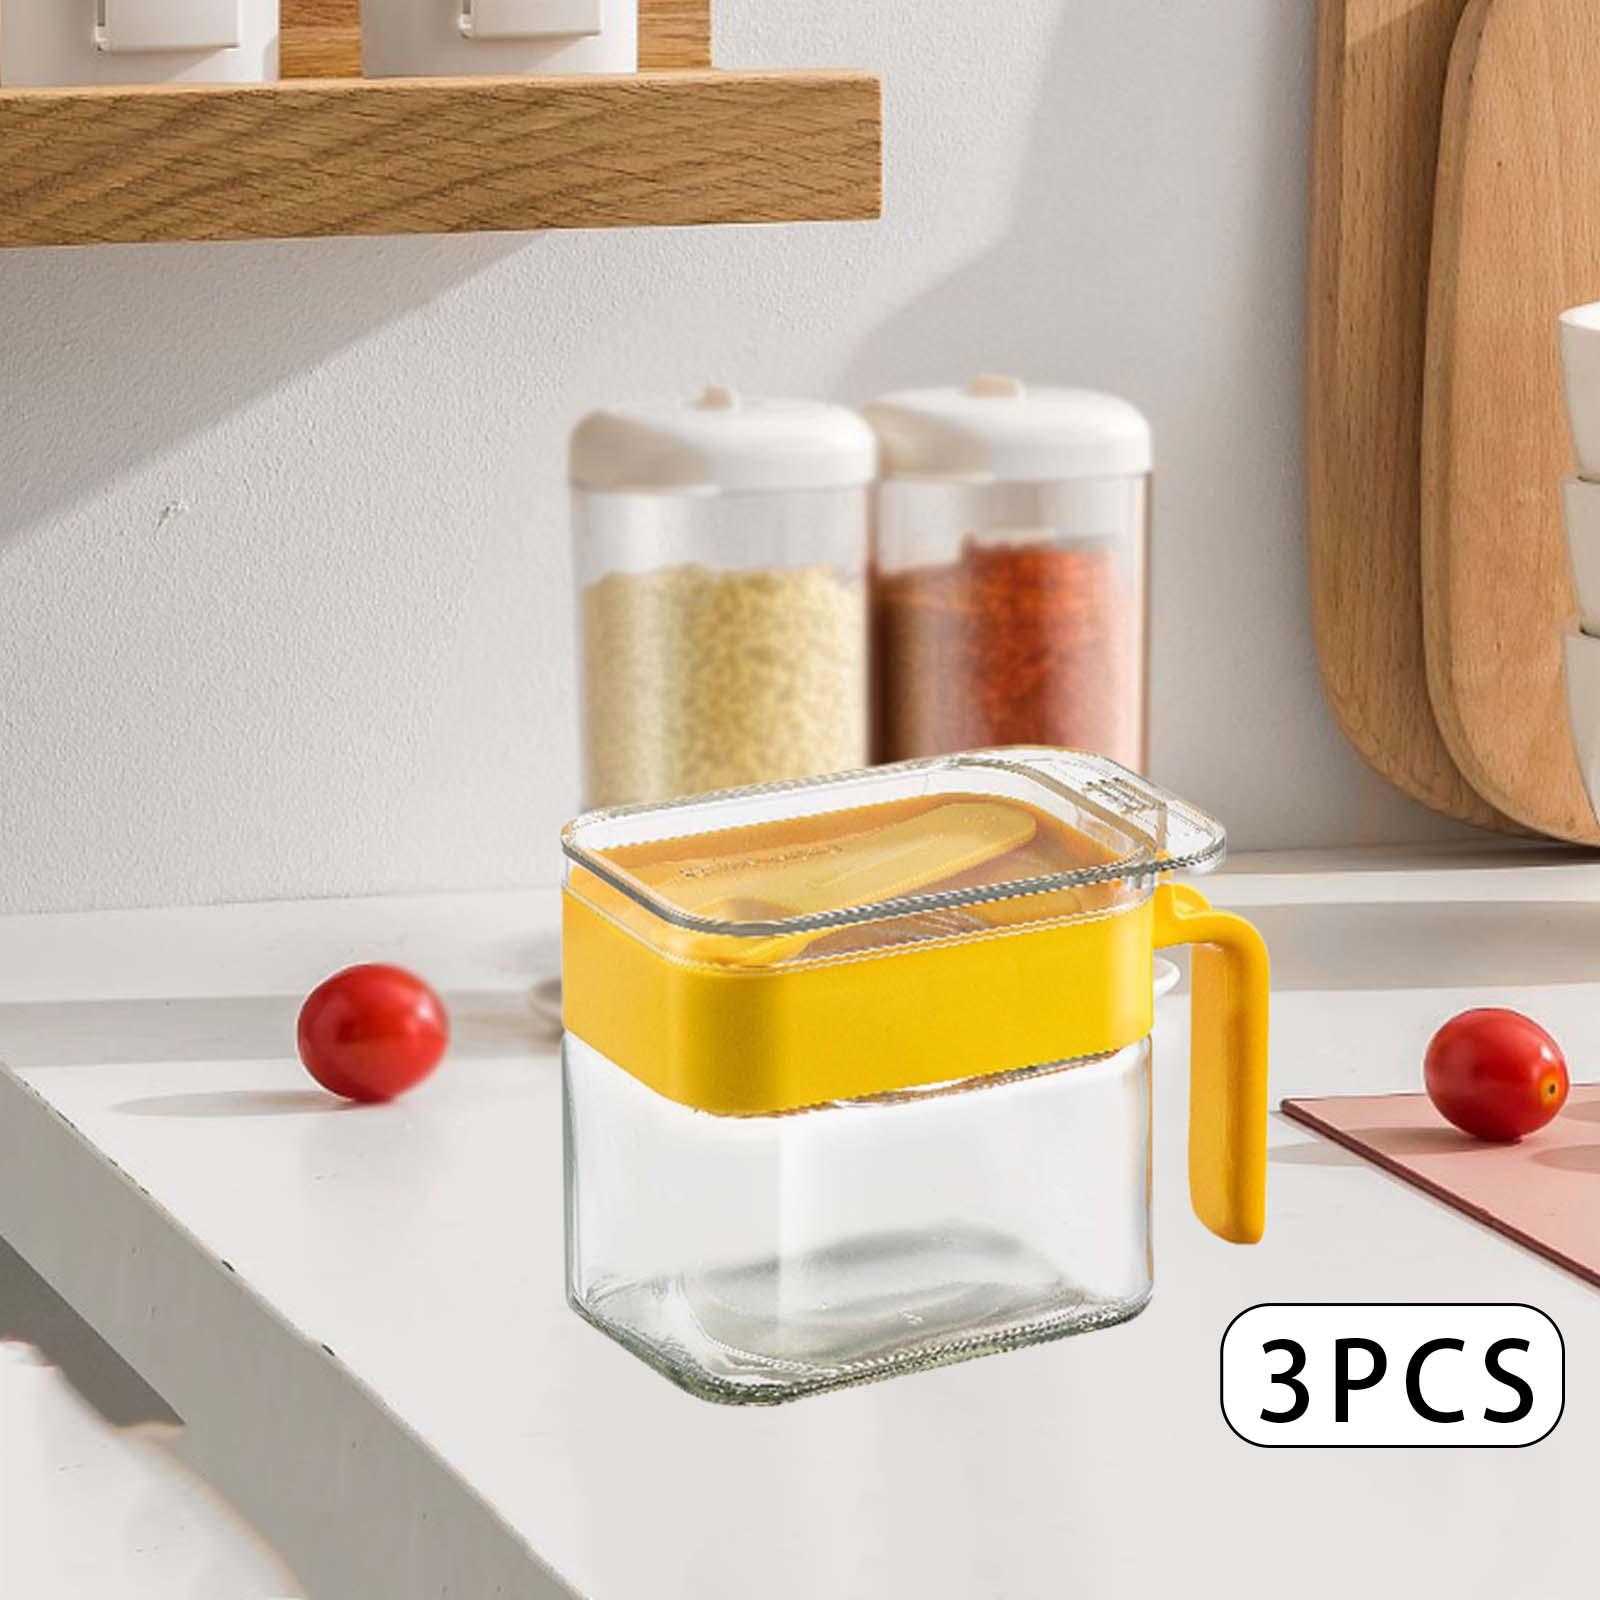 3 Pieces Spice Storage Box Spice Rack Condiment Box for Home Cooking Kitchen yellow